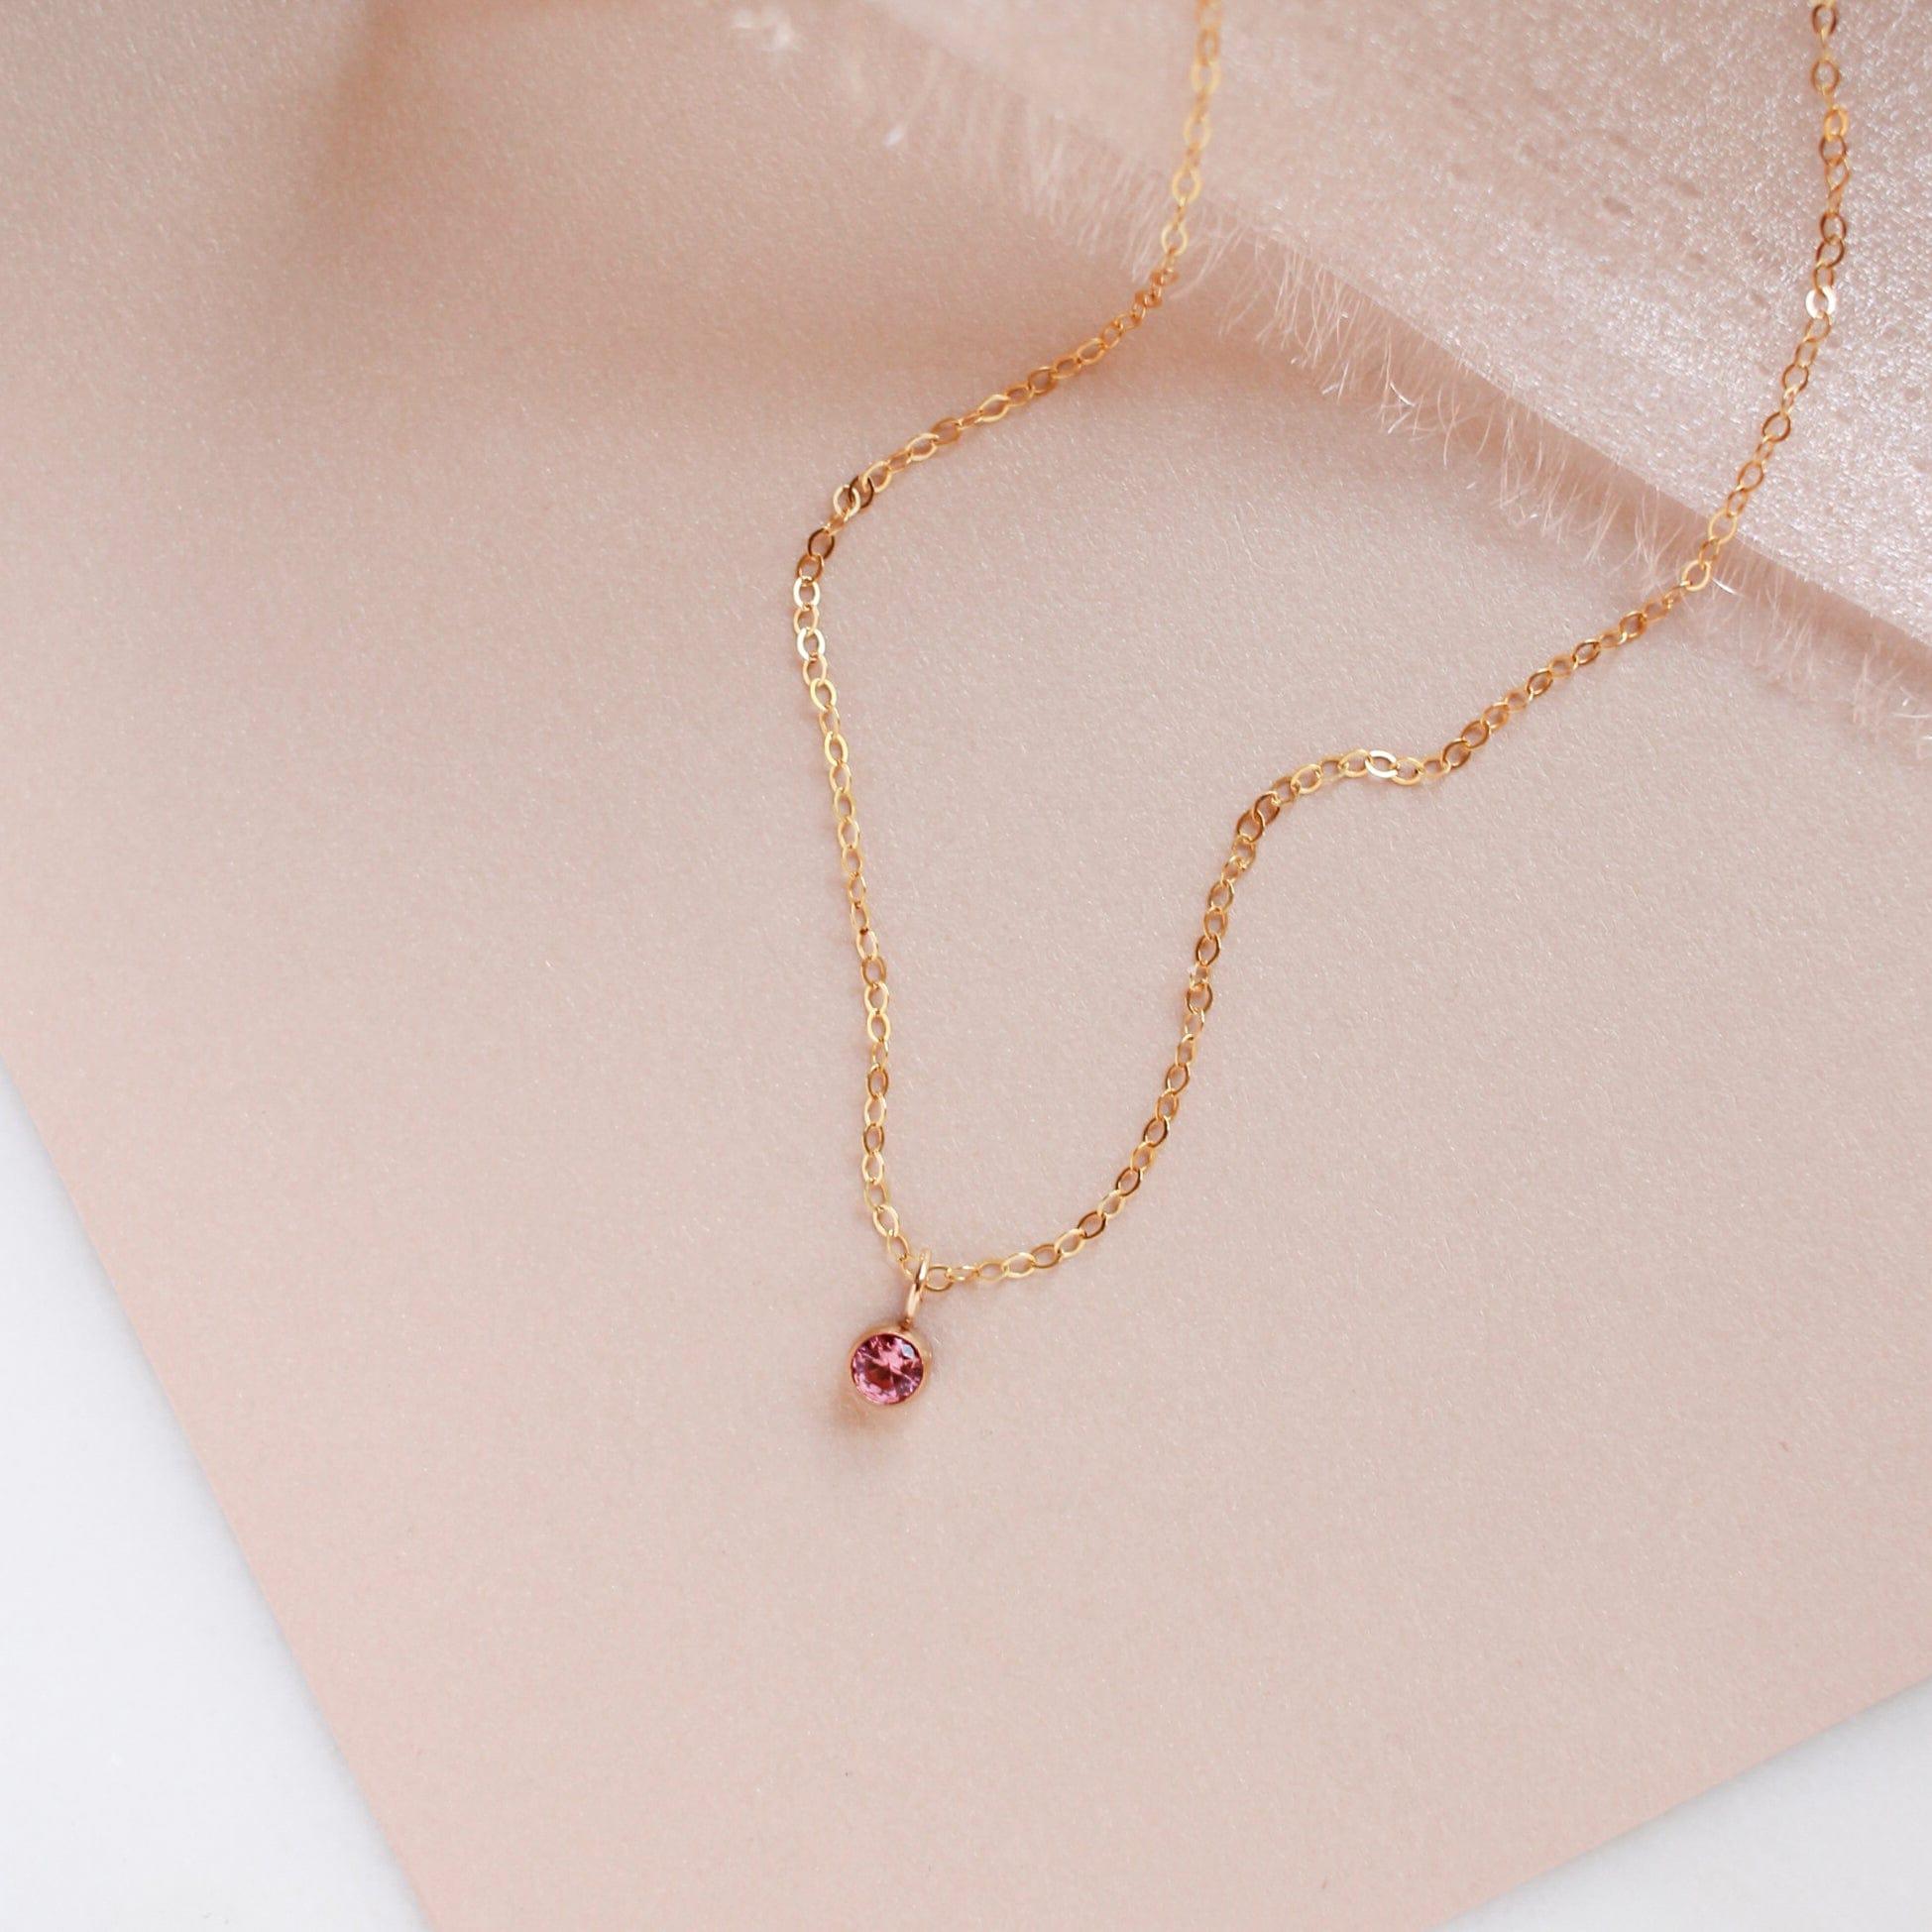 Birthstone Charm Necklace - Nolia Jewelry - Meaningful + Sustainably Handcrafted Jewelry